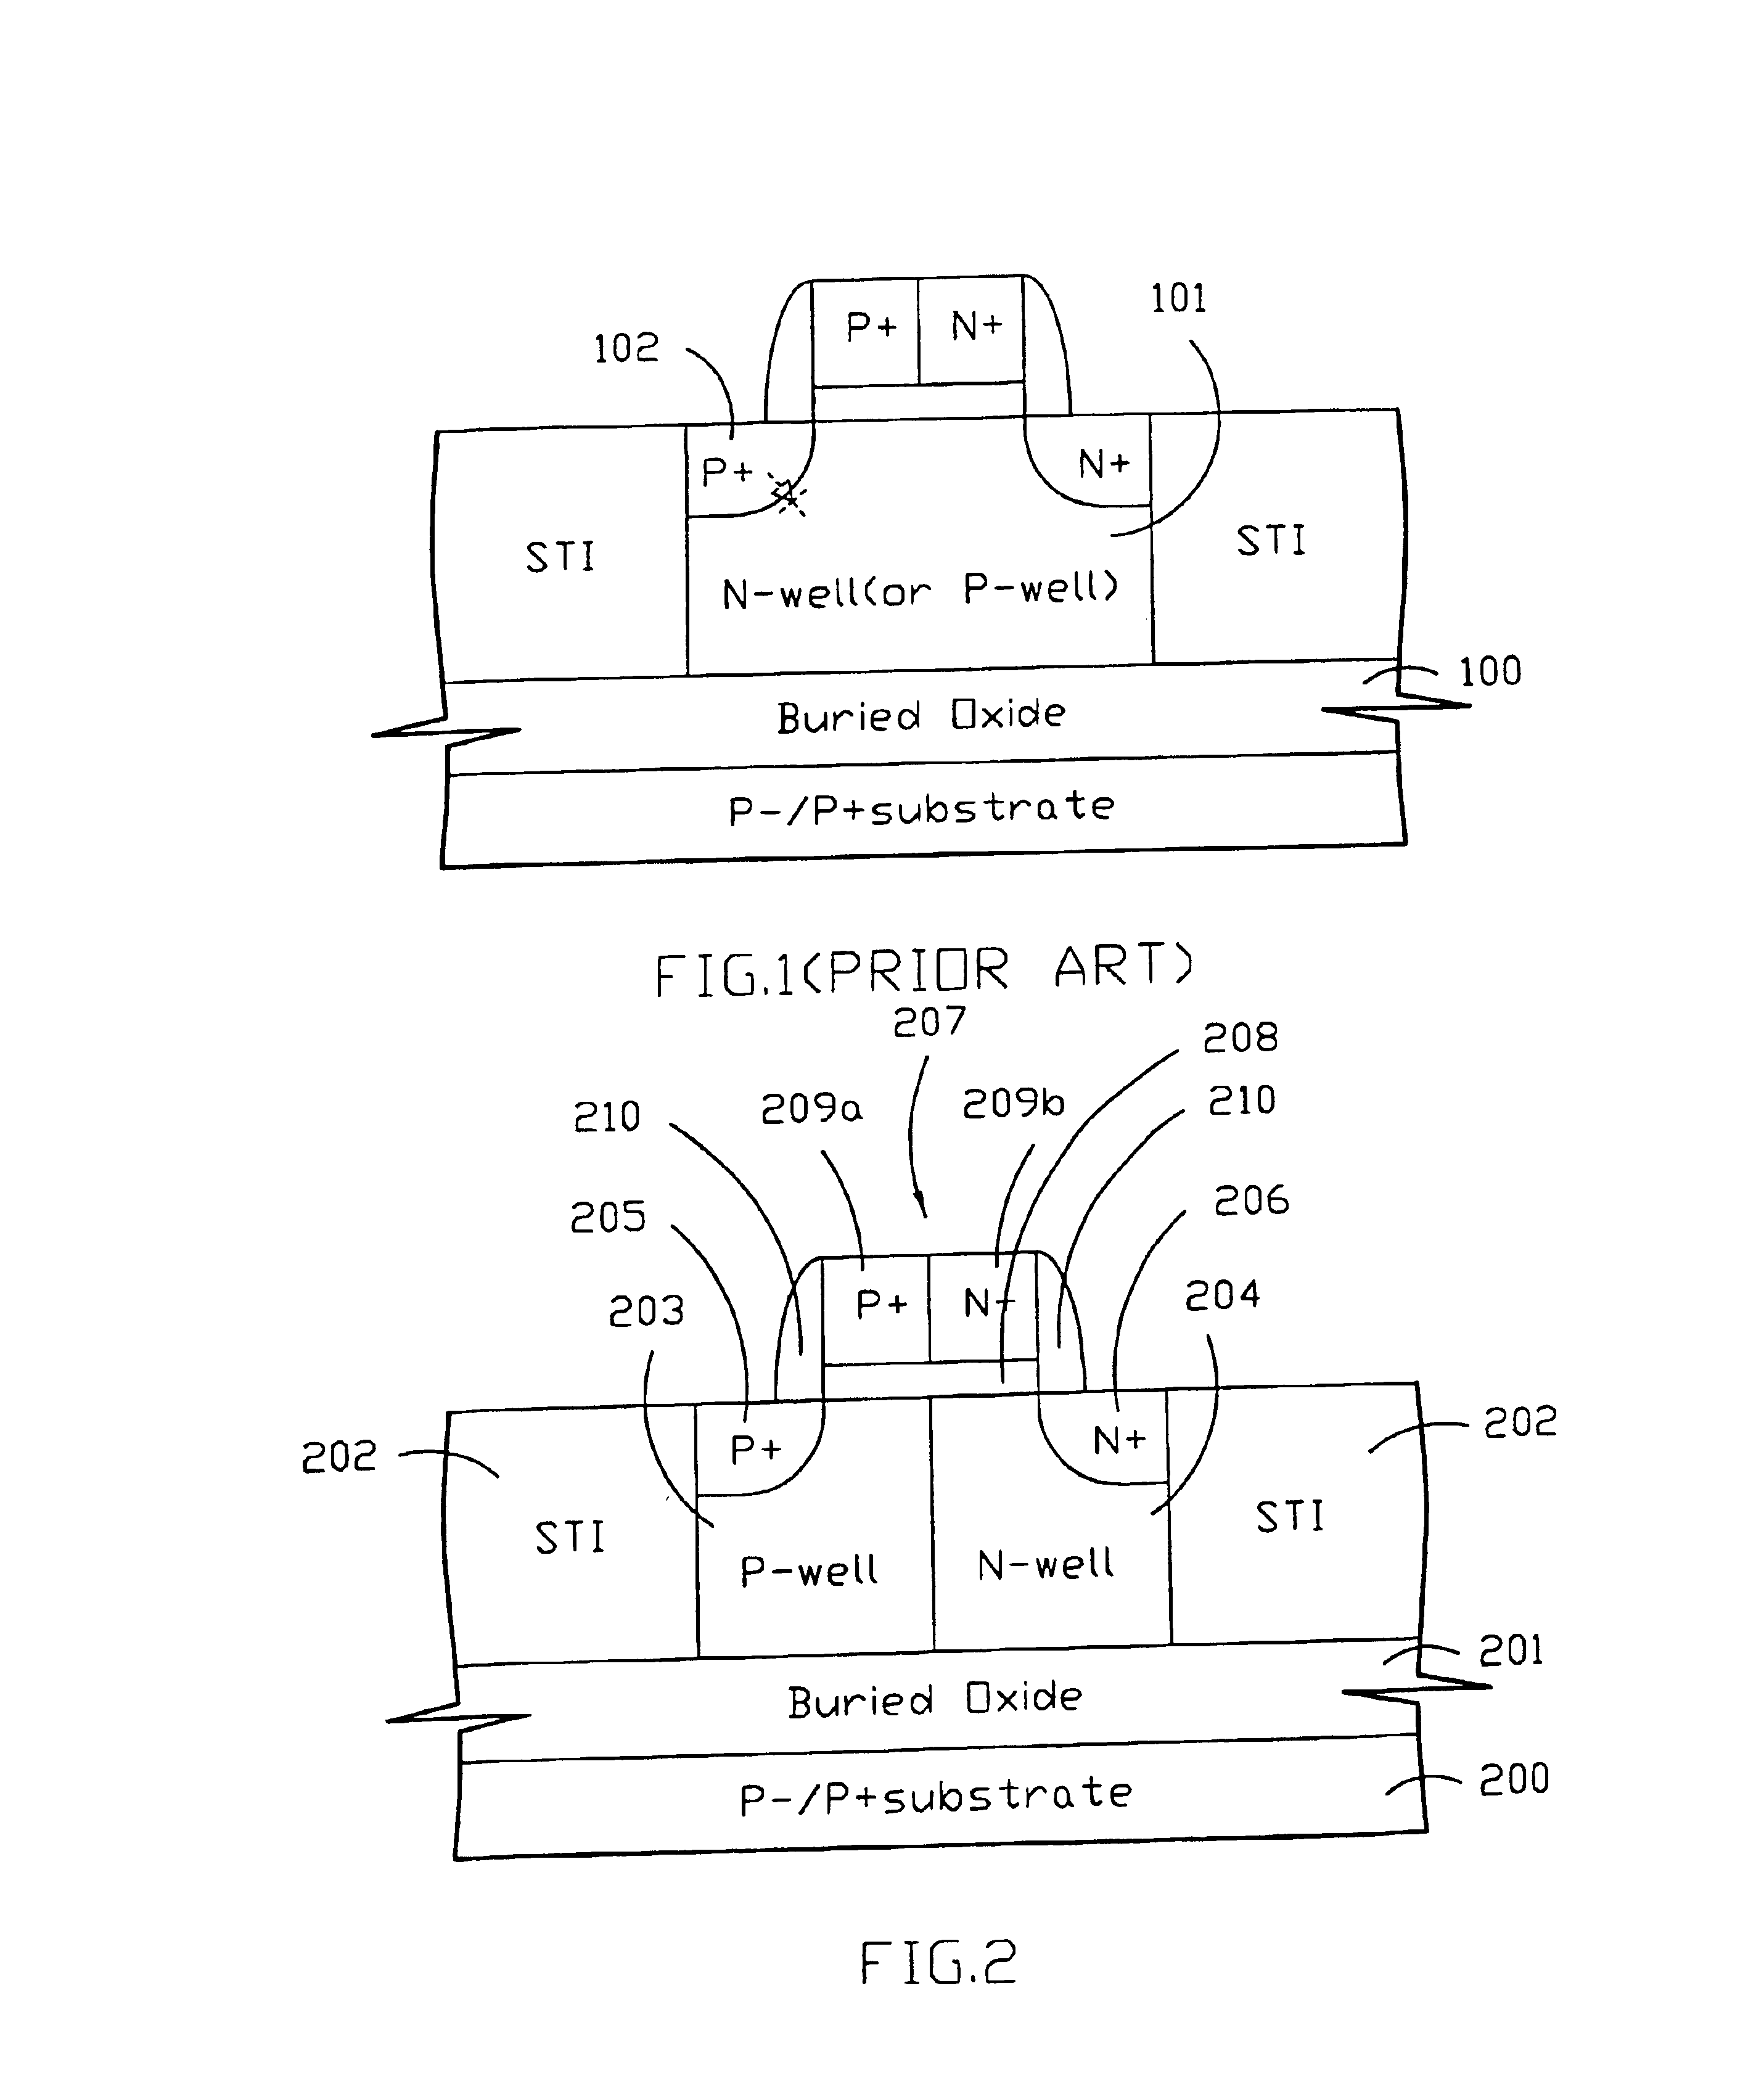 Silicon-on-insulator diodes and ESD protection circuits